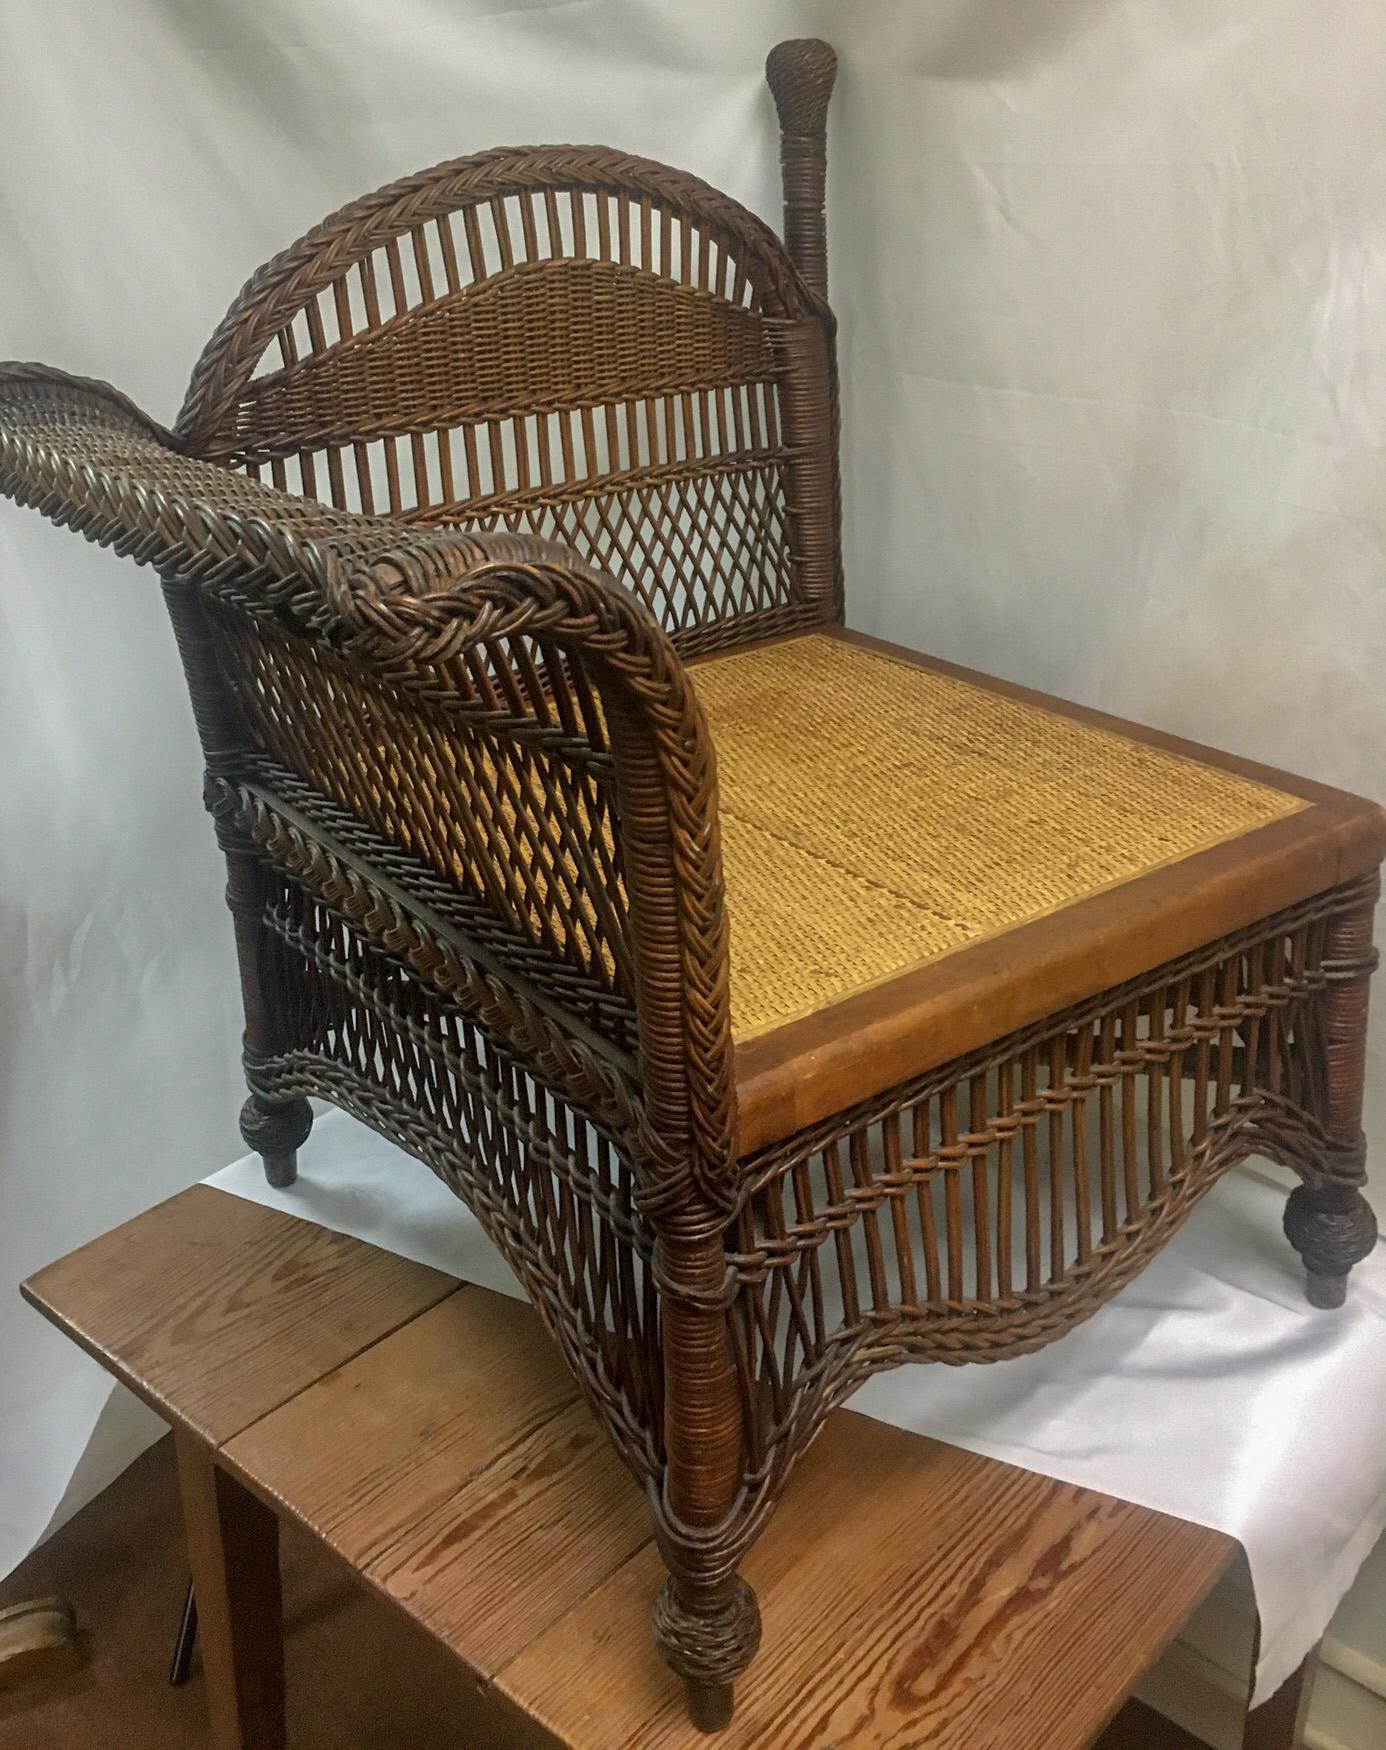 This charming Natural honey colored wicker divan was made by the Heywood-Wakefield Company around the turn of the last century. Features include round plied reed at post and wrapped feet, two ply braiding at the dome top, dual diagonally woven reed